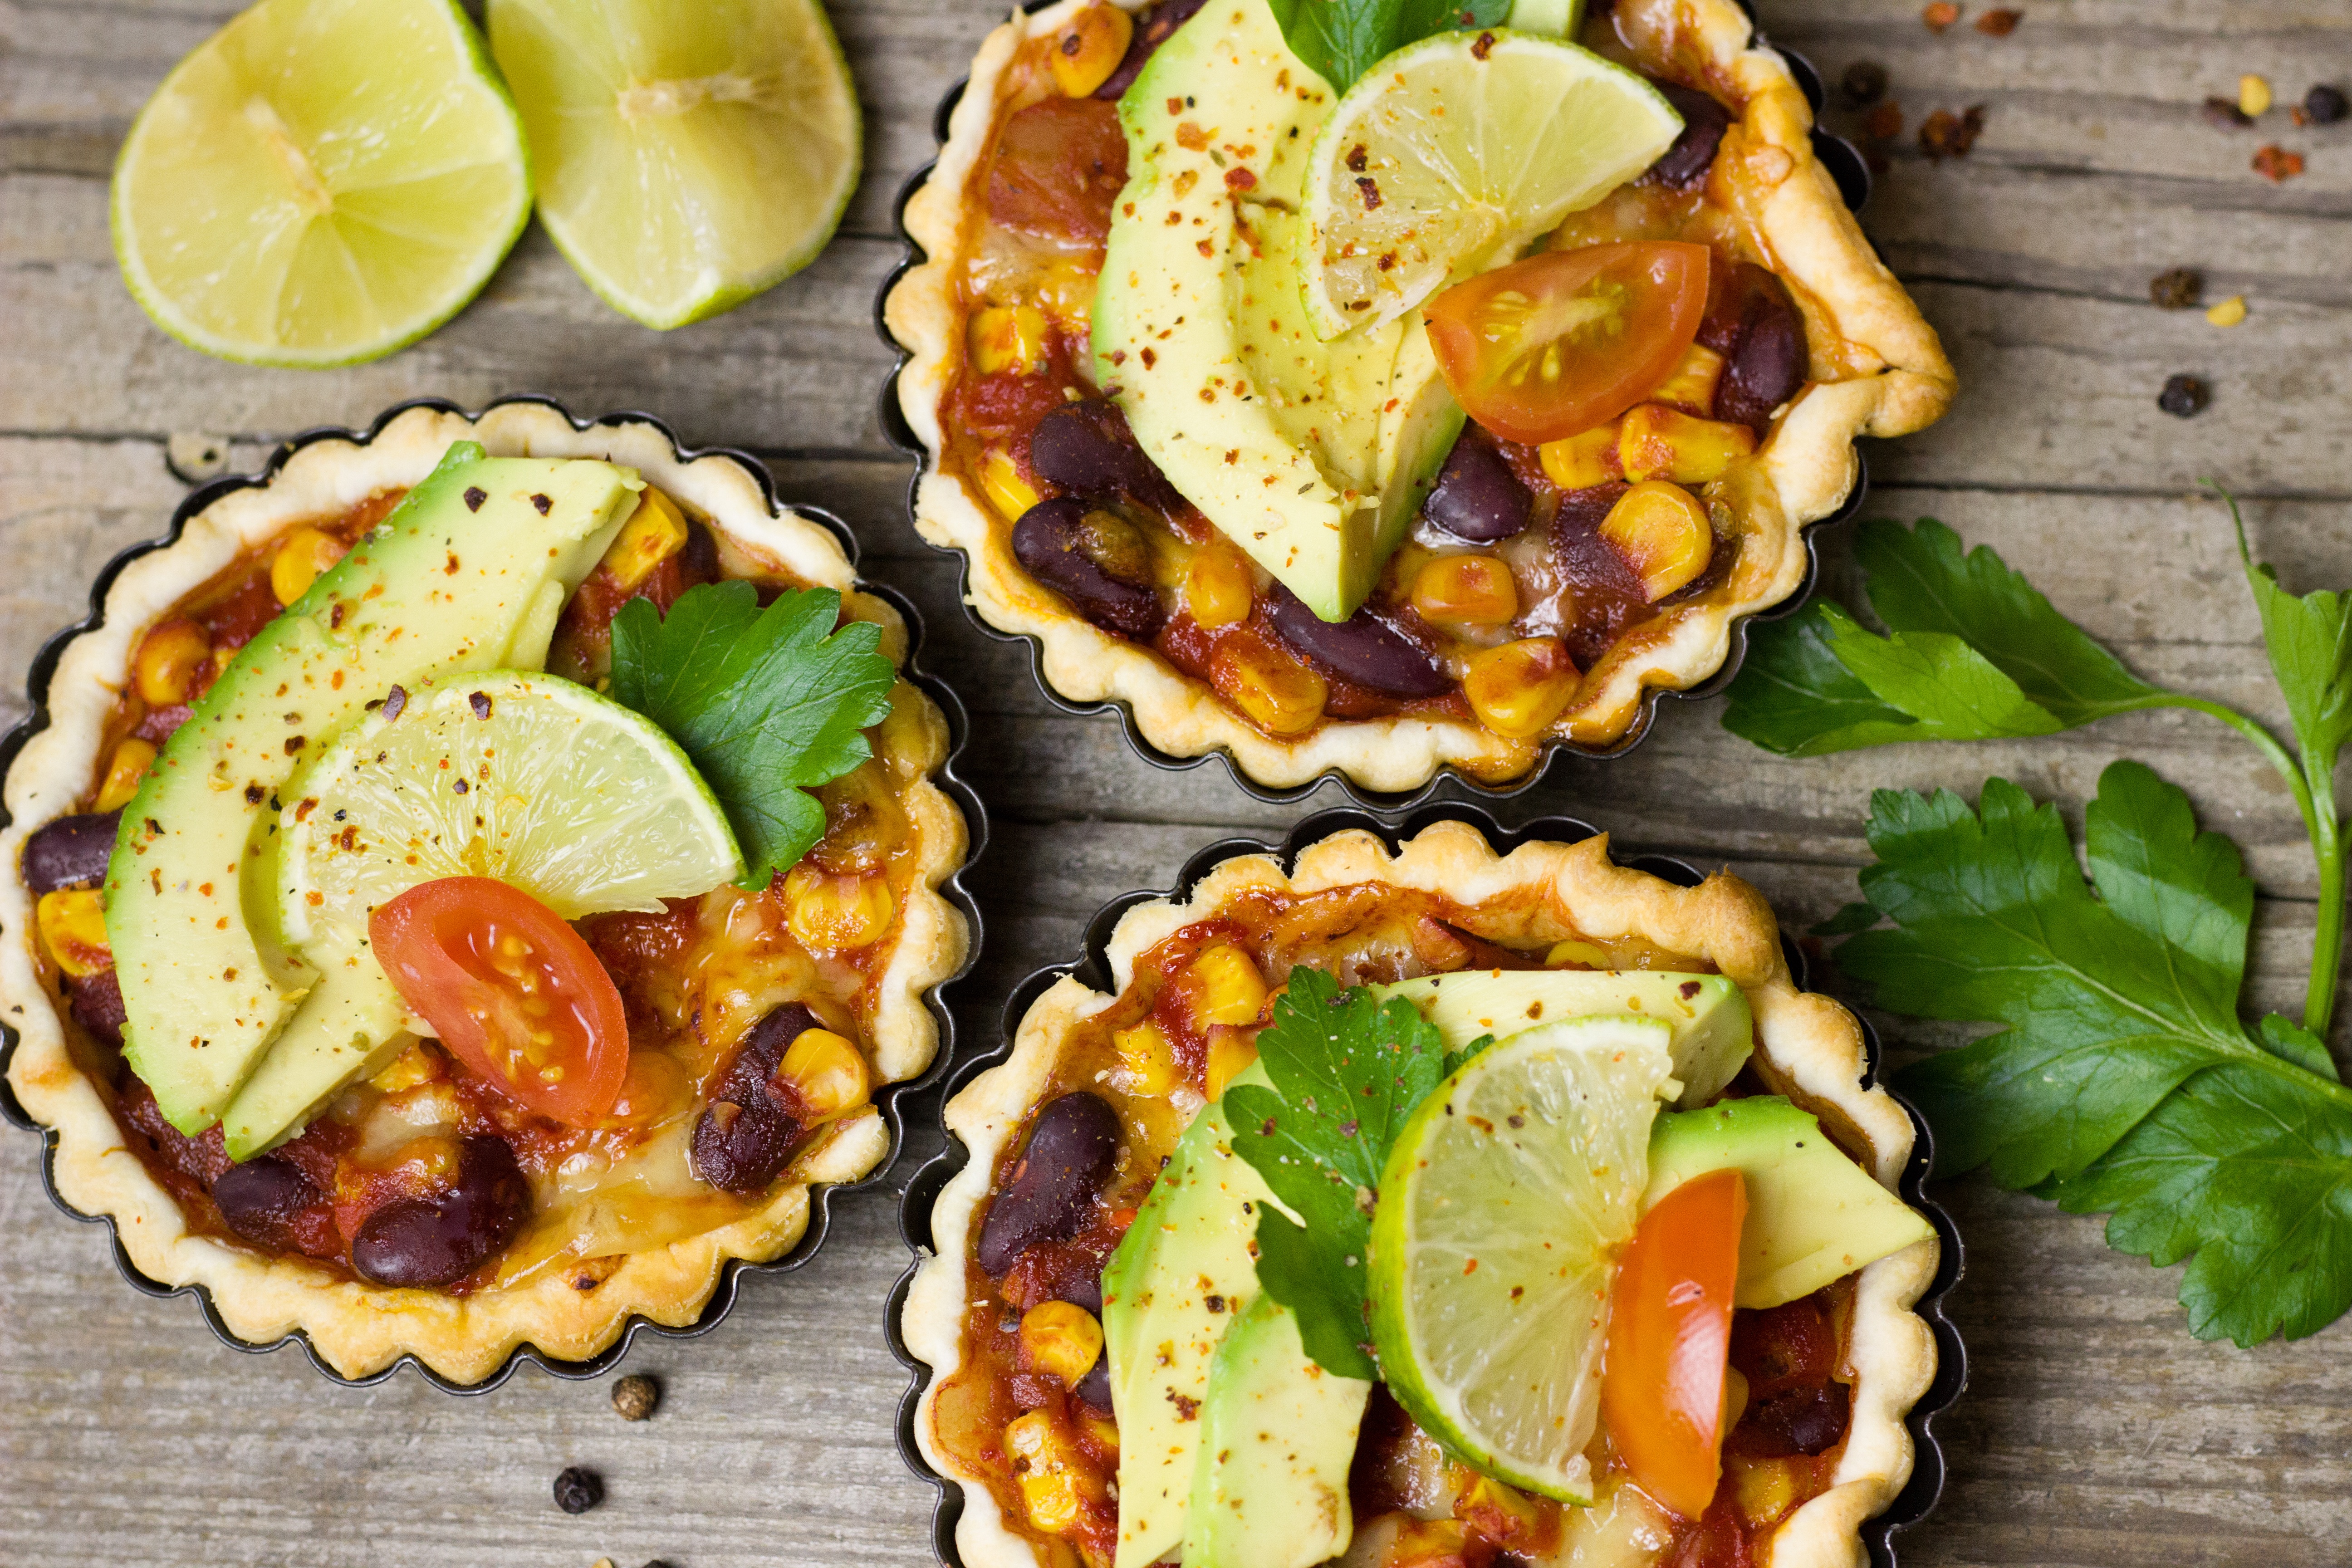 77985 download wallpaper food, vegetables, lime, avocado, tartlets screensavers and pictures for free